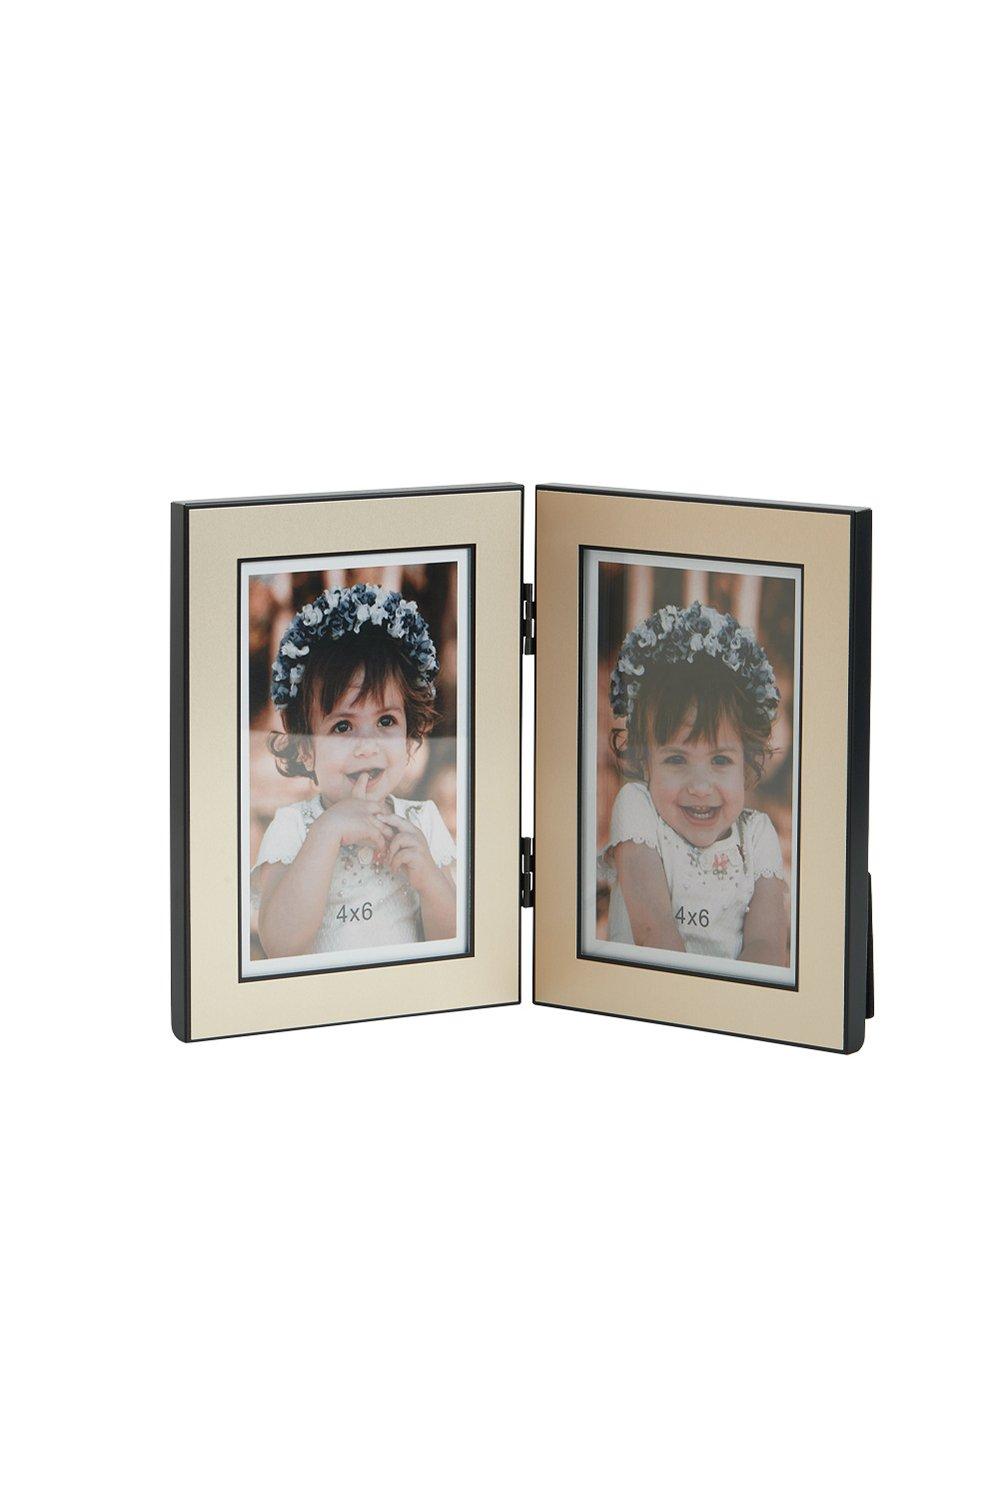 Morden Photo Picture Frame Holds 2